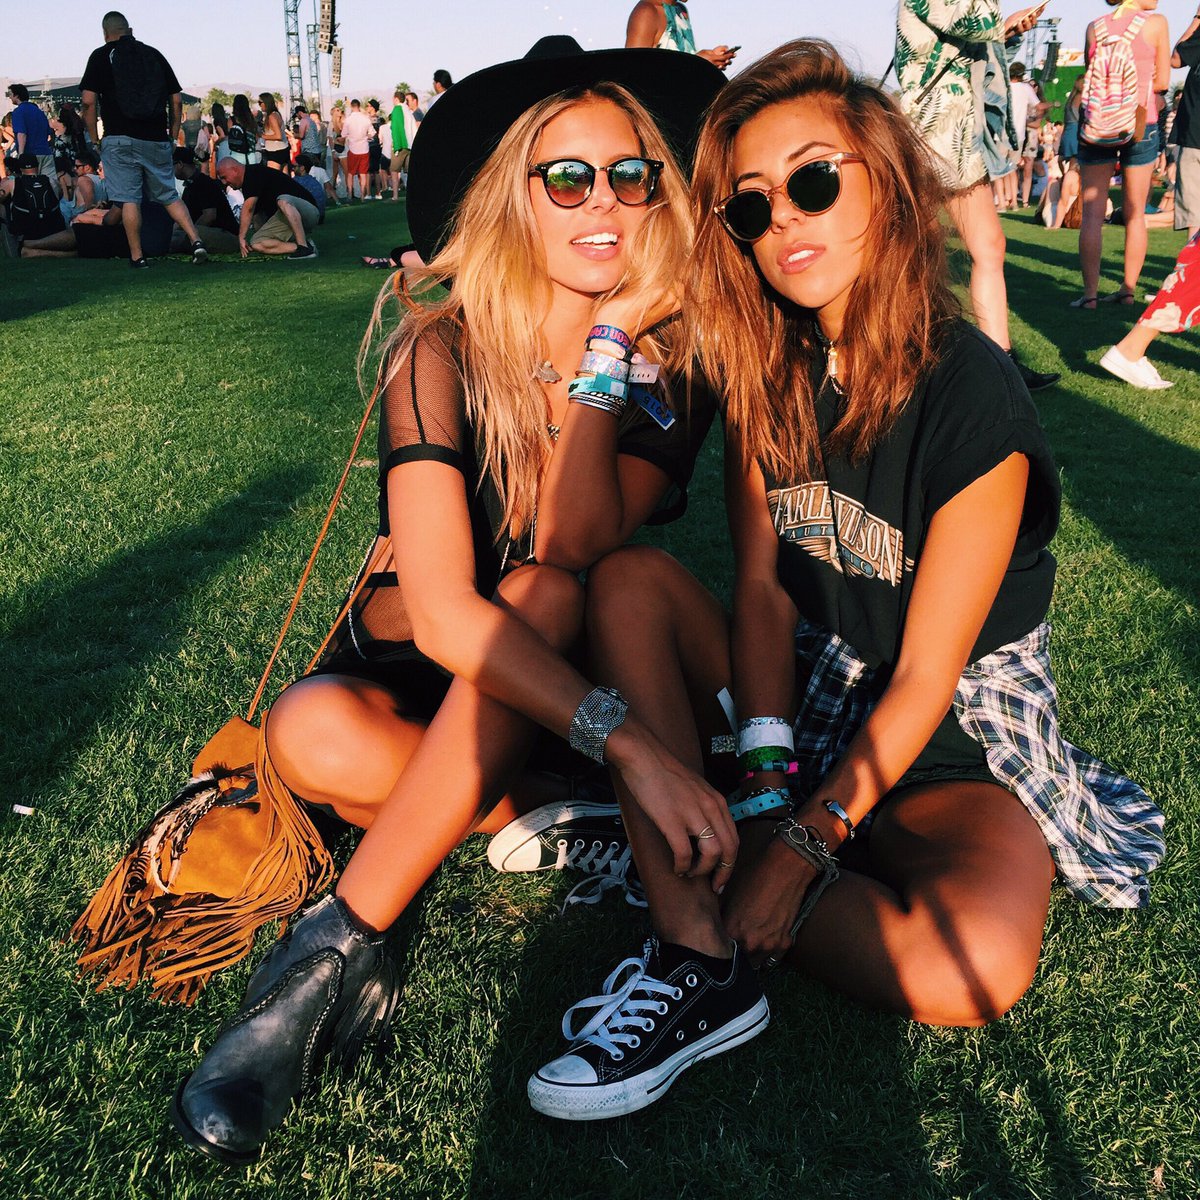 Tag whoever is going to be your partner in crime at Coachella! ???? #tashanddev https://t.co/iPfbFn0Ylh